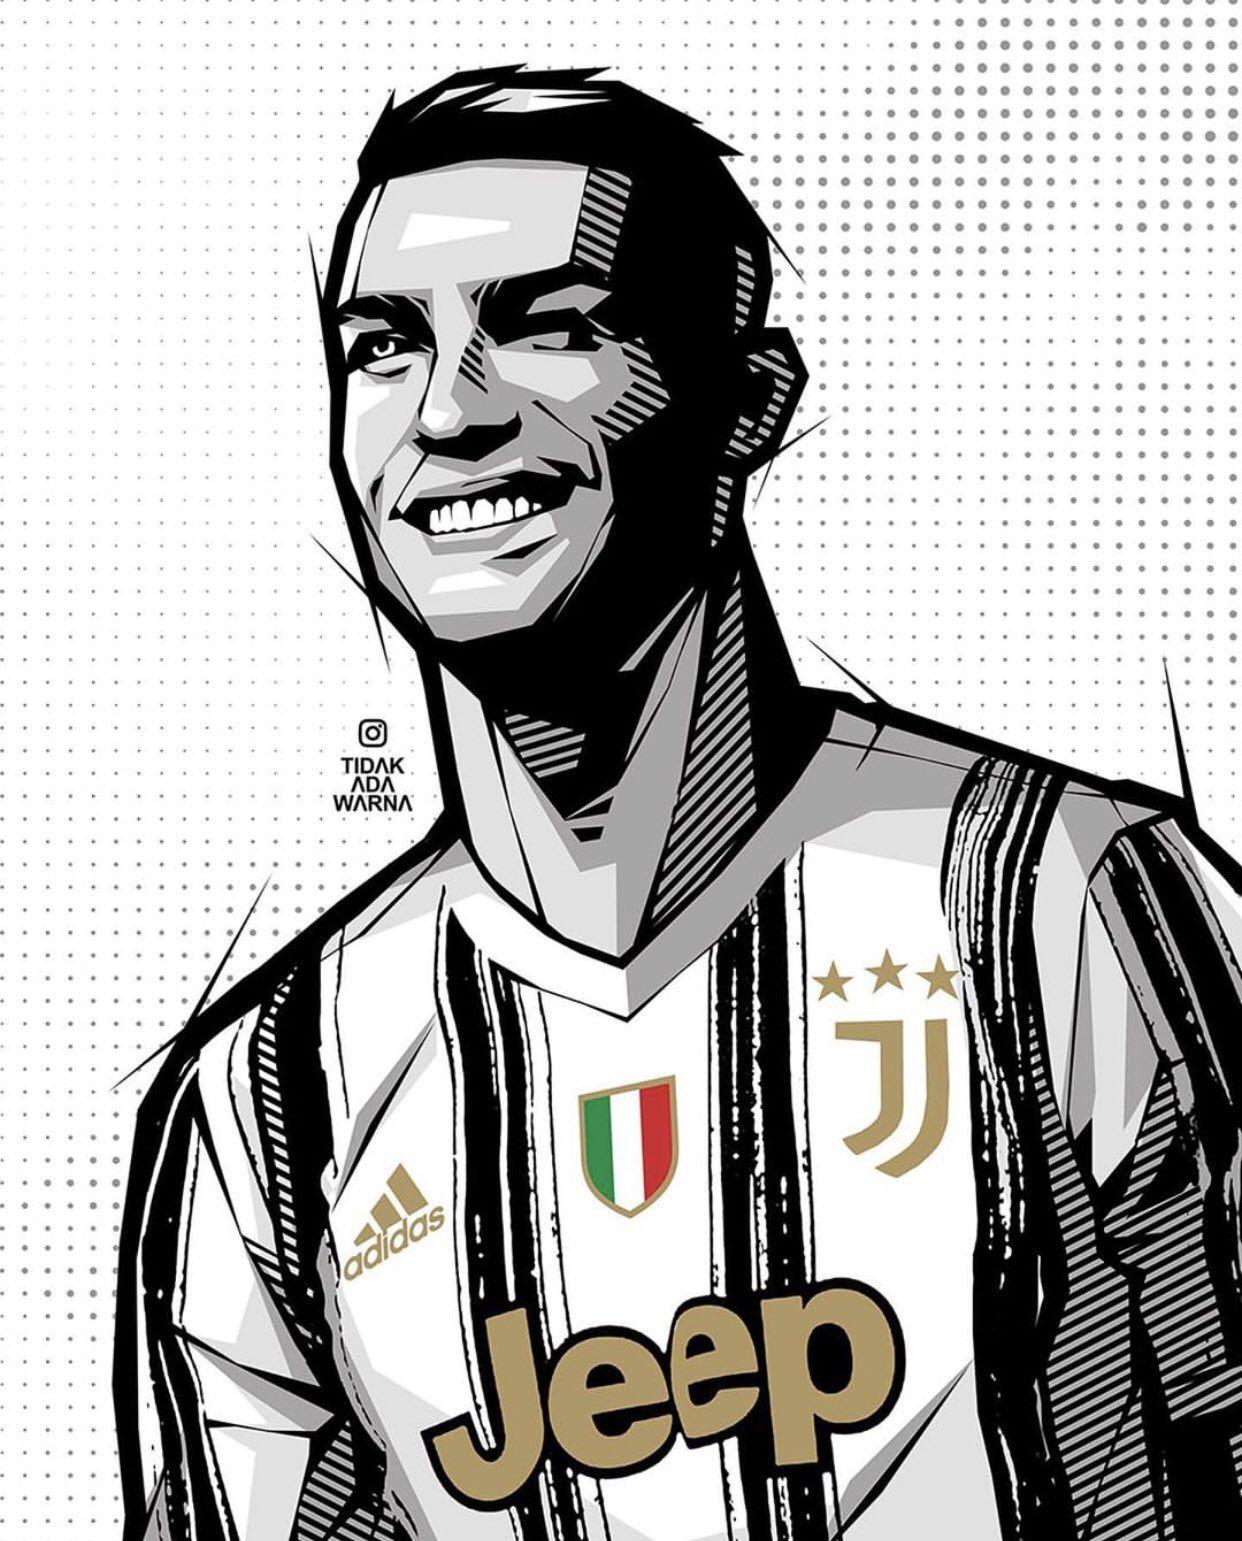 How To Draw Cristiano Ronaldo Step by Step - [16 Easy Phase] | Cristiano  ronaldo, Ronaldo, Easy drawings